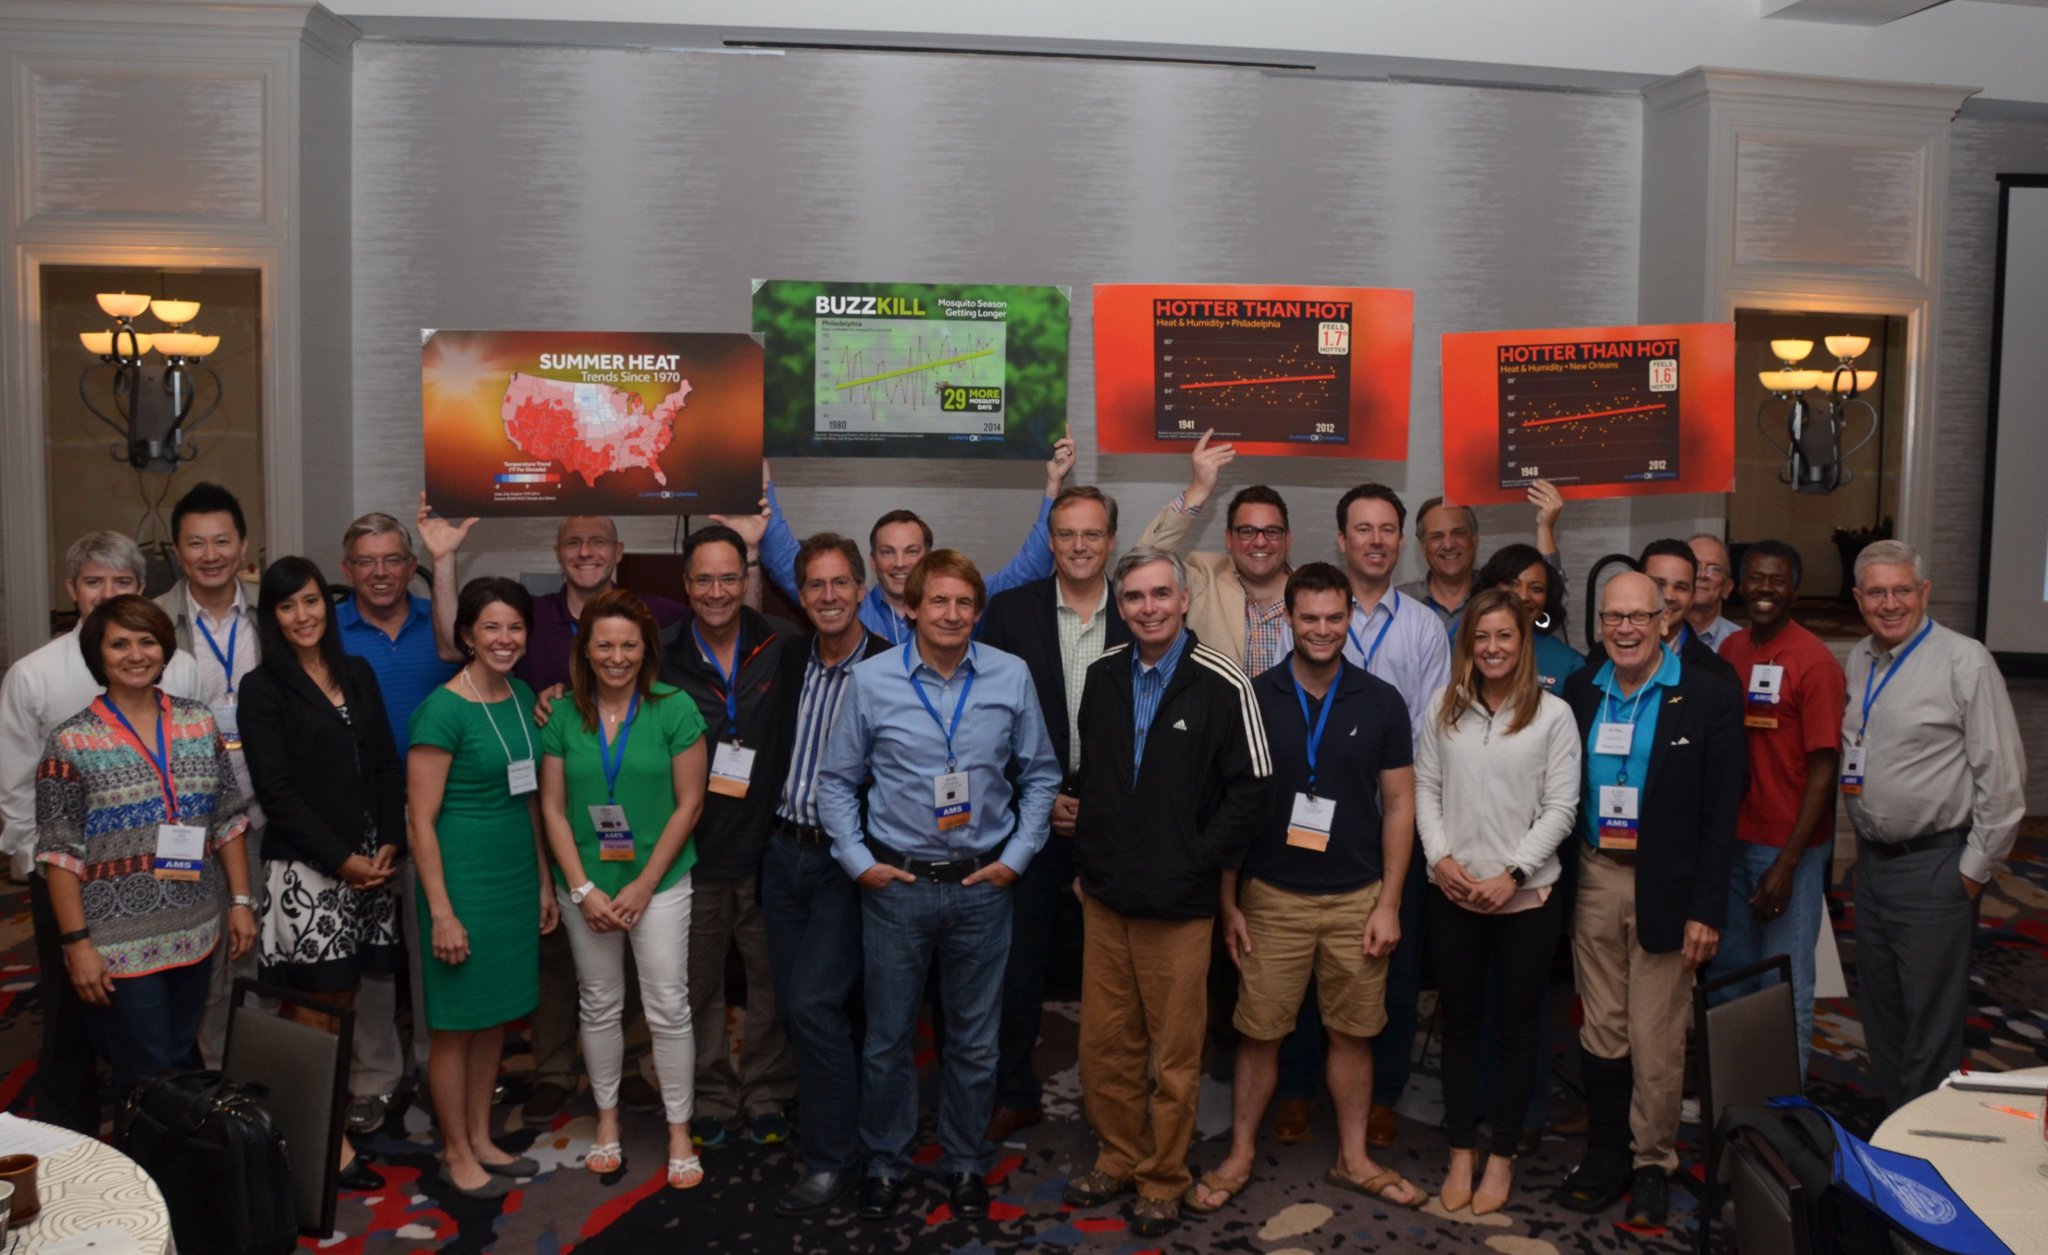 The attendees, and speakers, at the short course on weather and climate at the AMS meeting in Austin today. Photo ctsy. John Lindsey